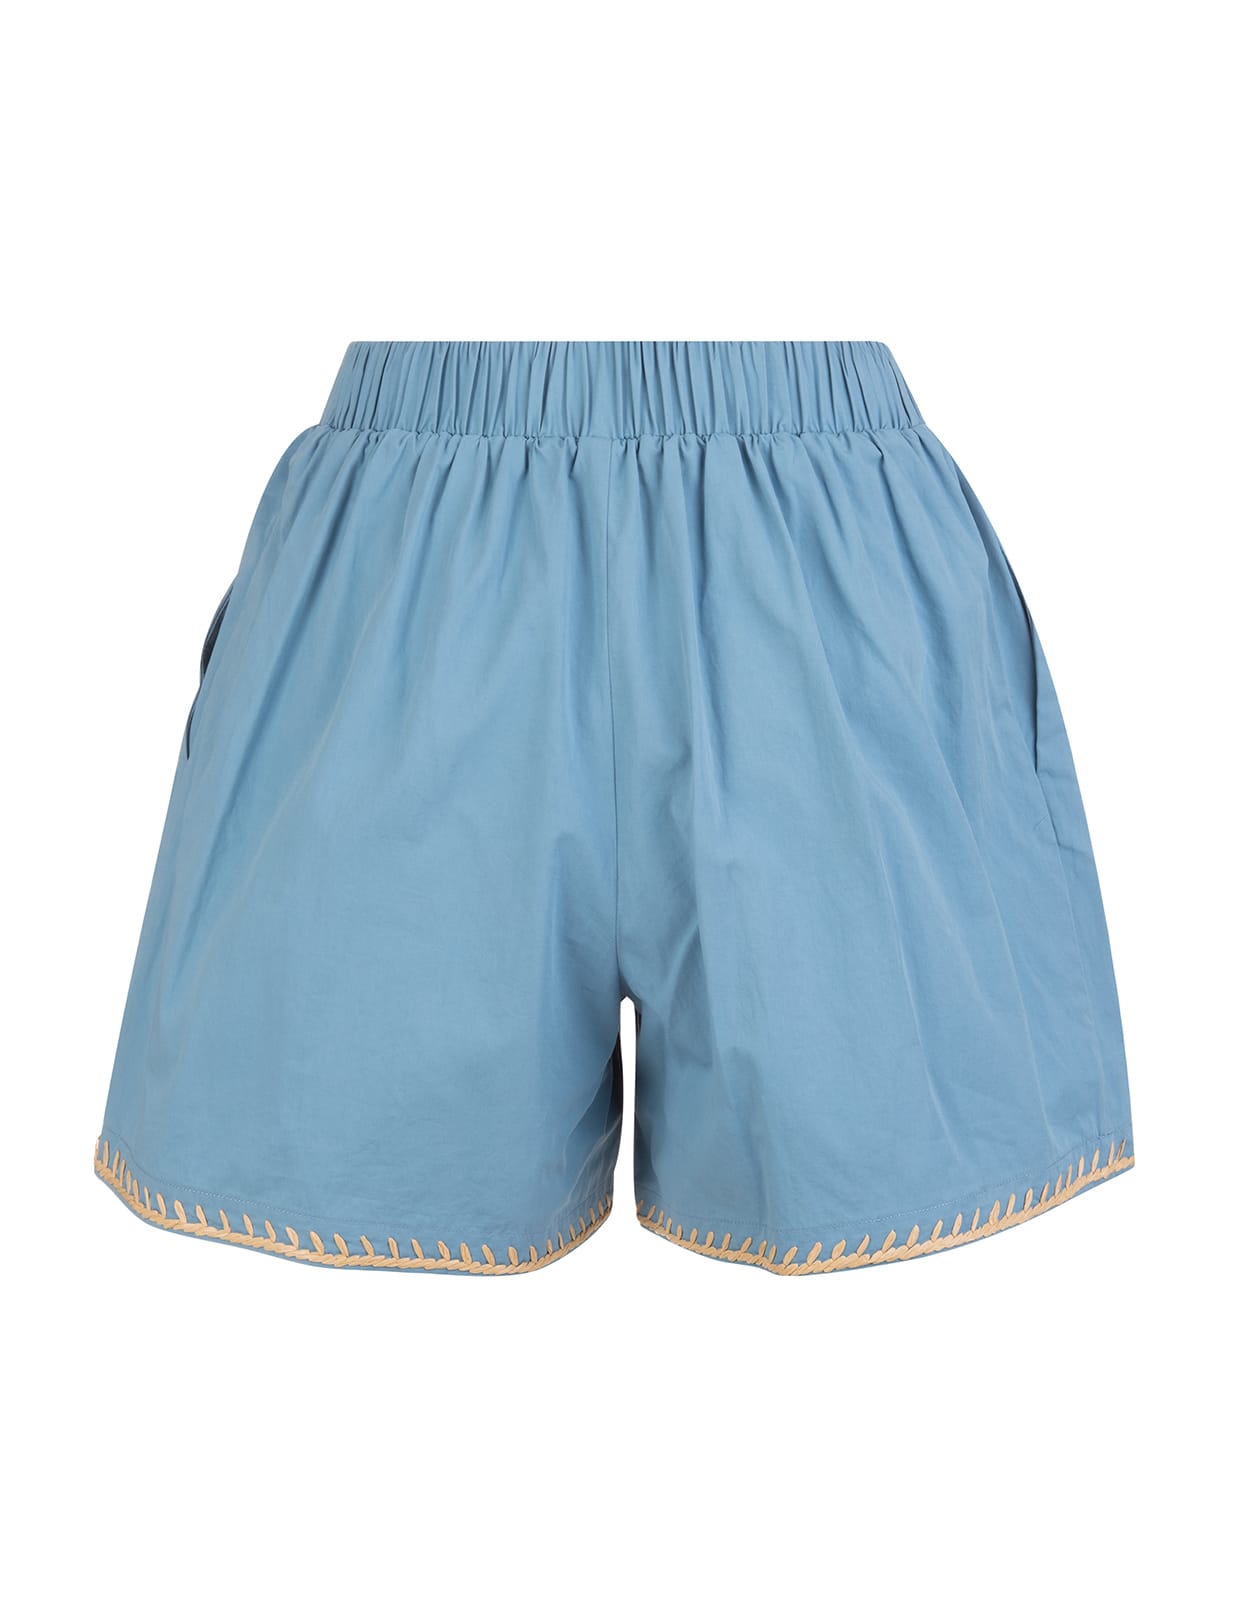 RED Valentino Woman Light Blue Shorts With Yellow Gold Embroidery